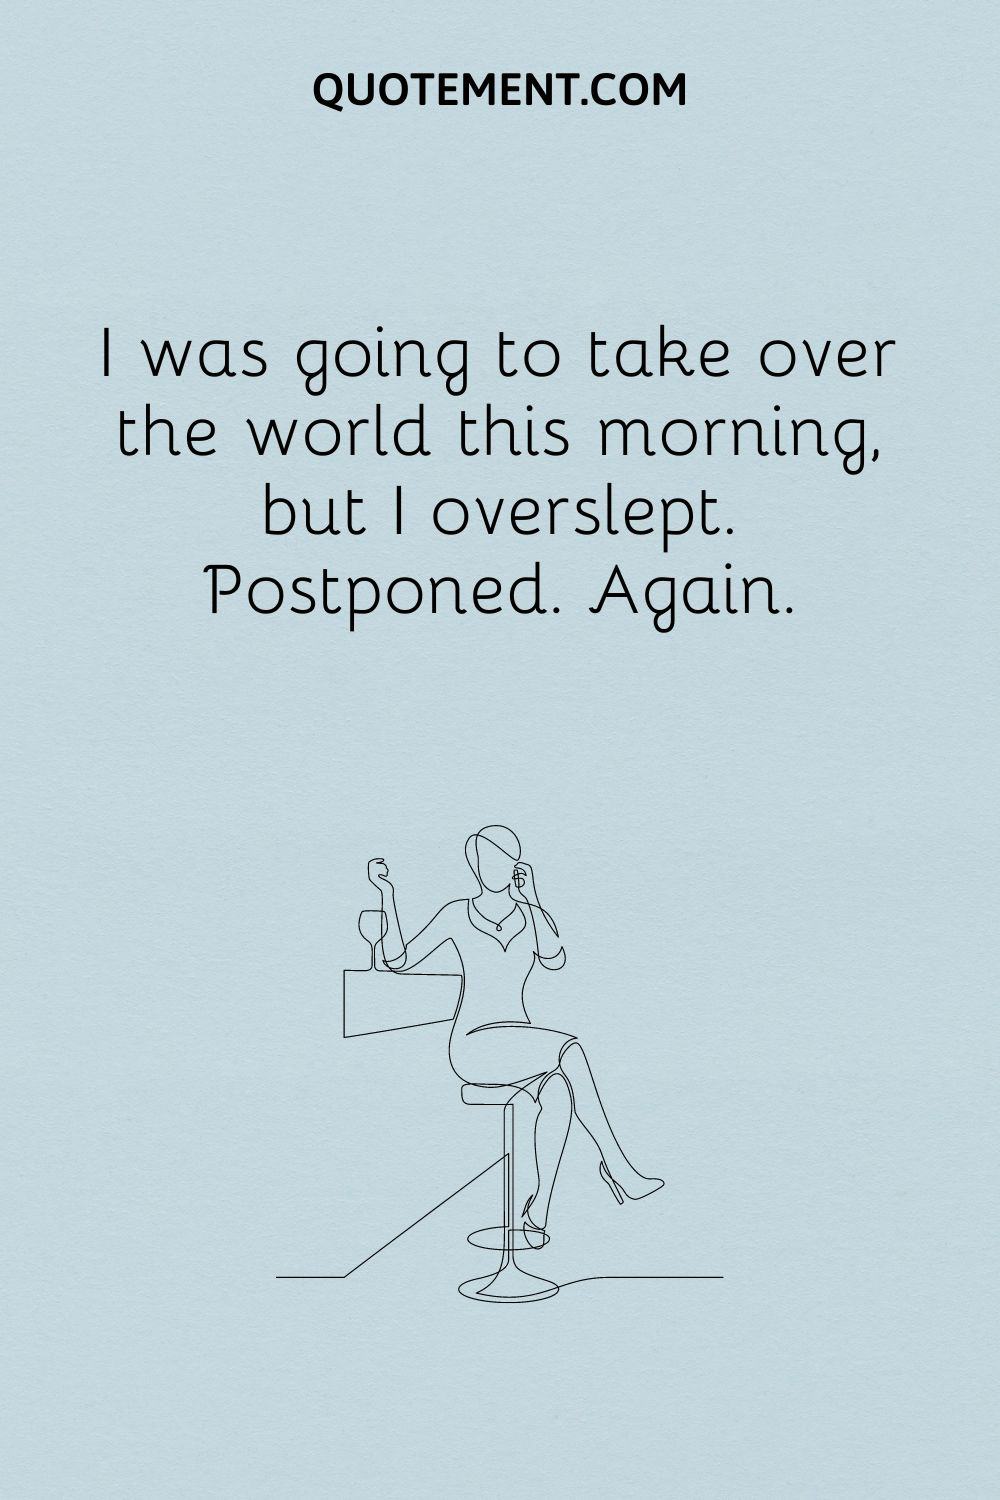 I was going to take over the world this morning, but I overslept.